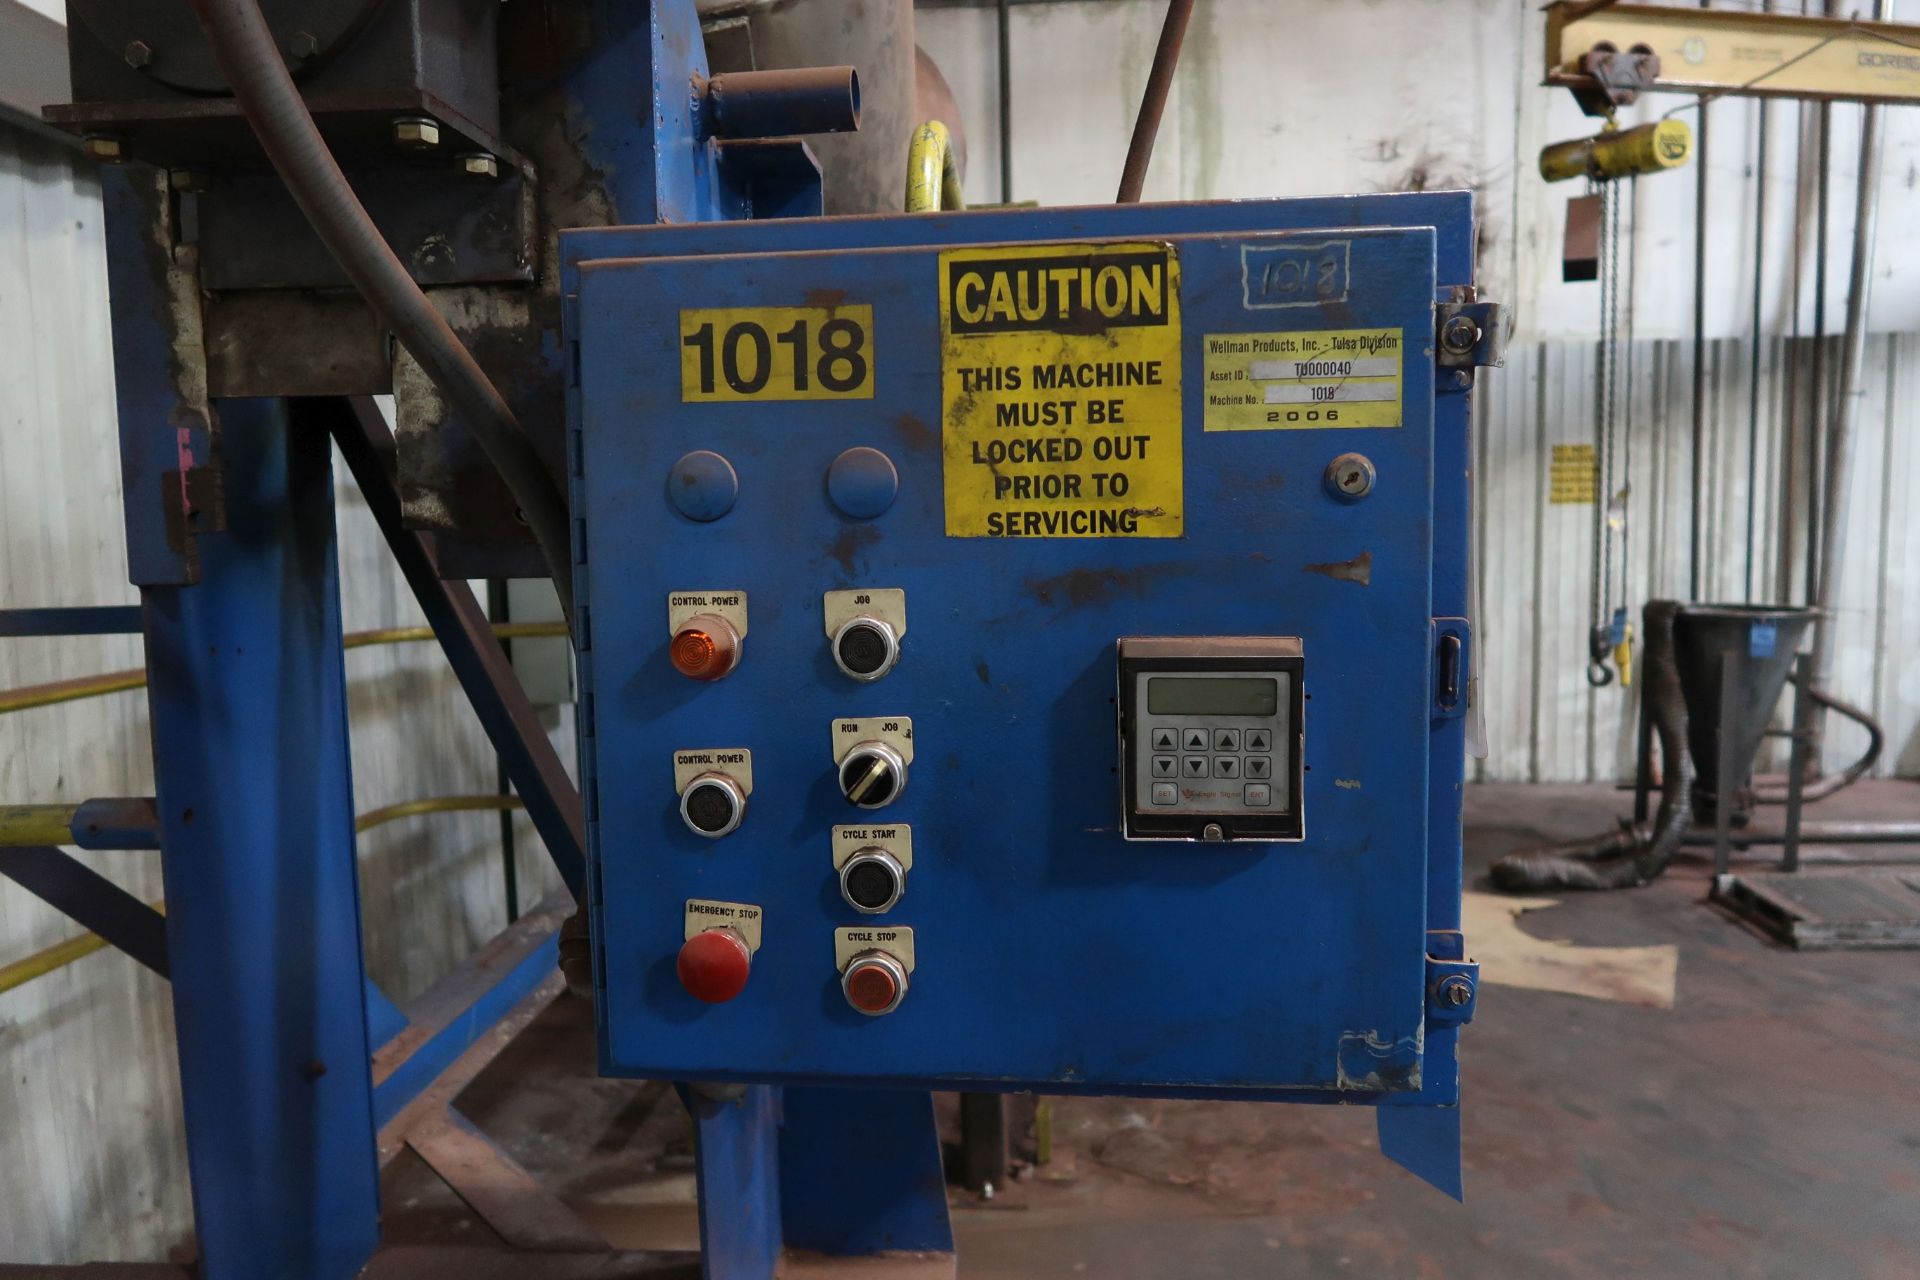 10 CUBIC FOOT PATTERSON KELLEY TWIN SHELL DRY BLENDER; S/N 94617 **LOADING PRICE DUE TO ERRA - $ - Image 3 of 4